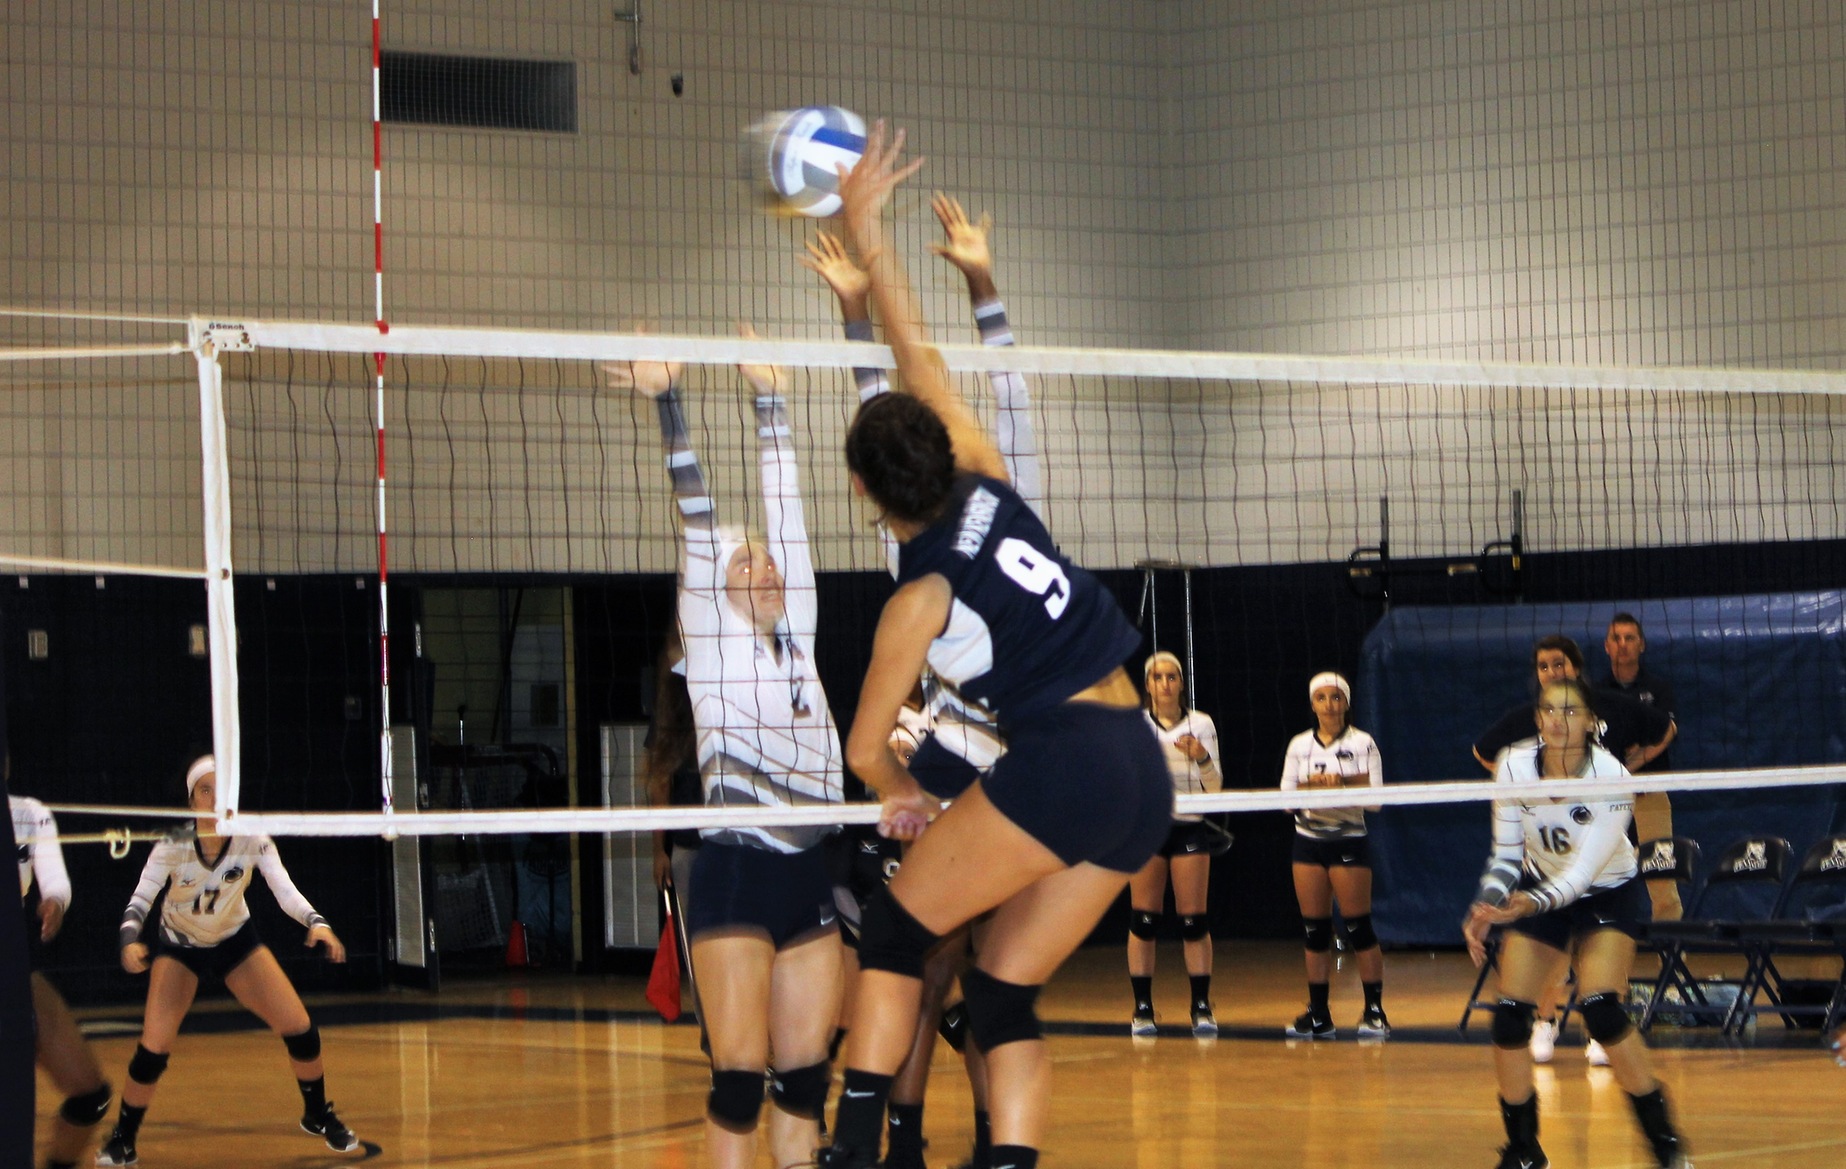 Women's Volleyball Wins Two at Saturday's PSUAC Quad Match